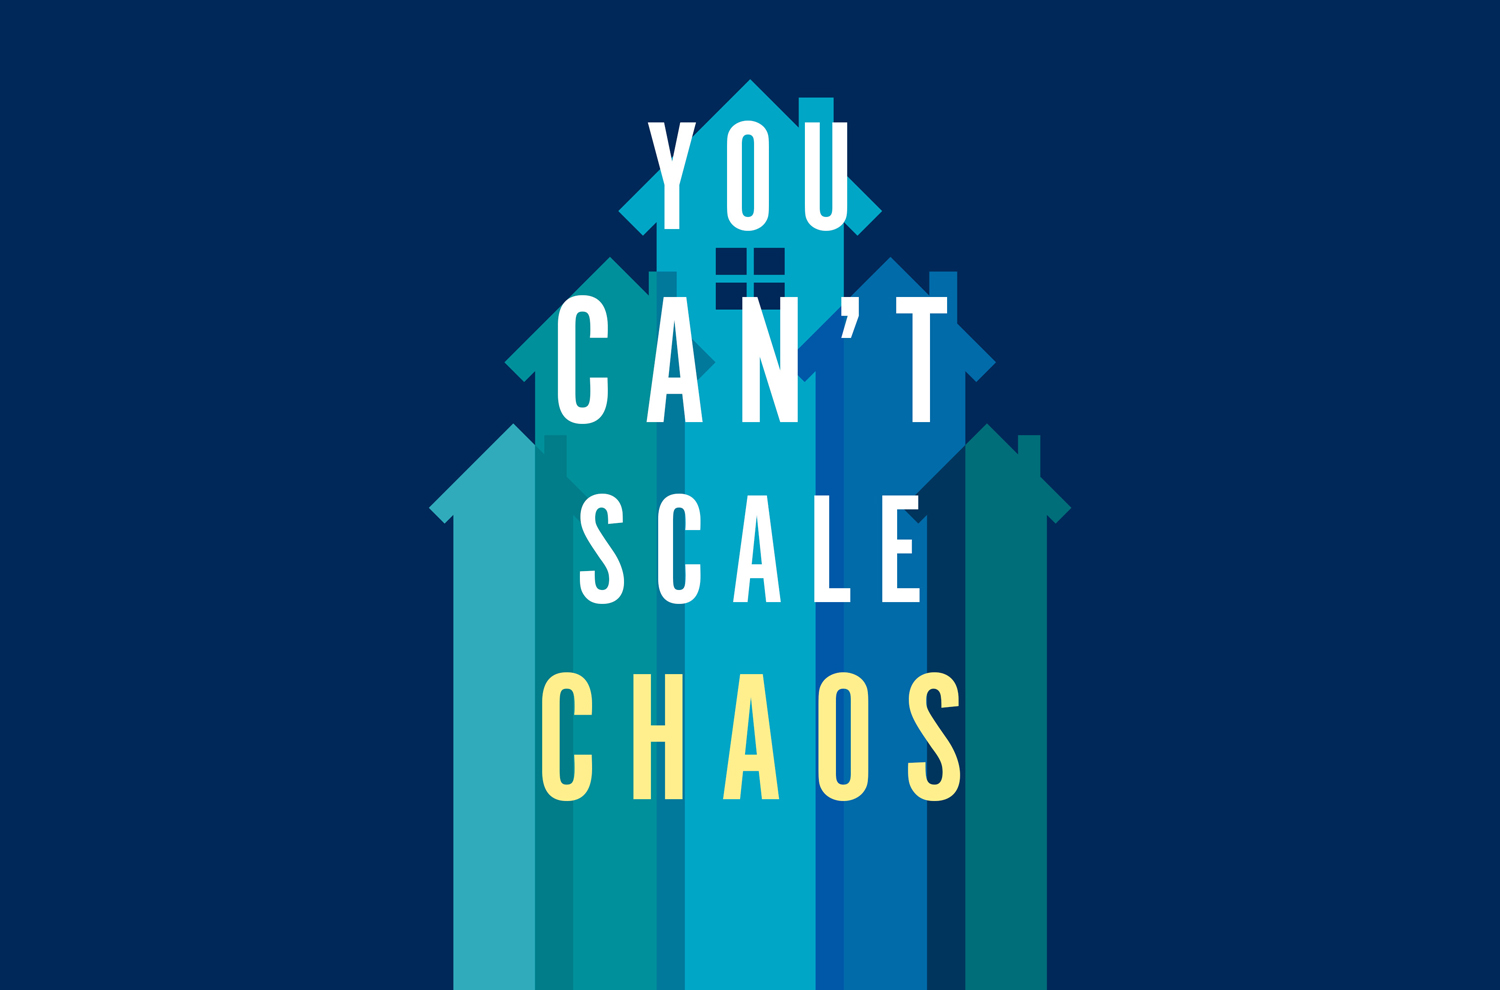 Image of You can't scale chaos